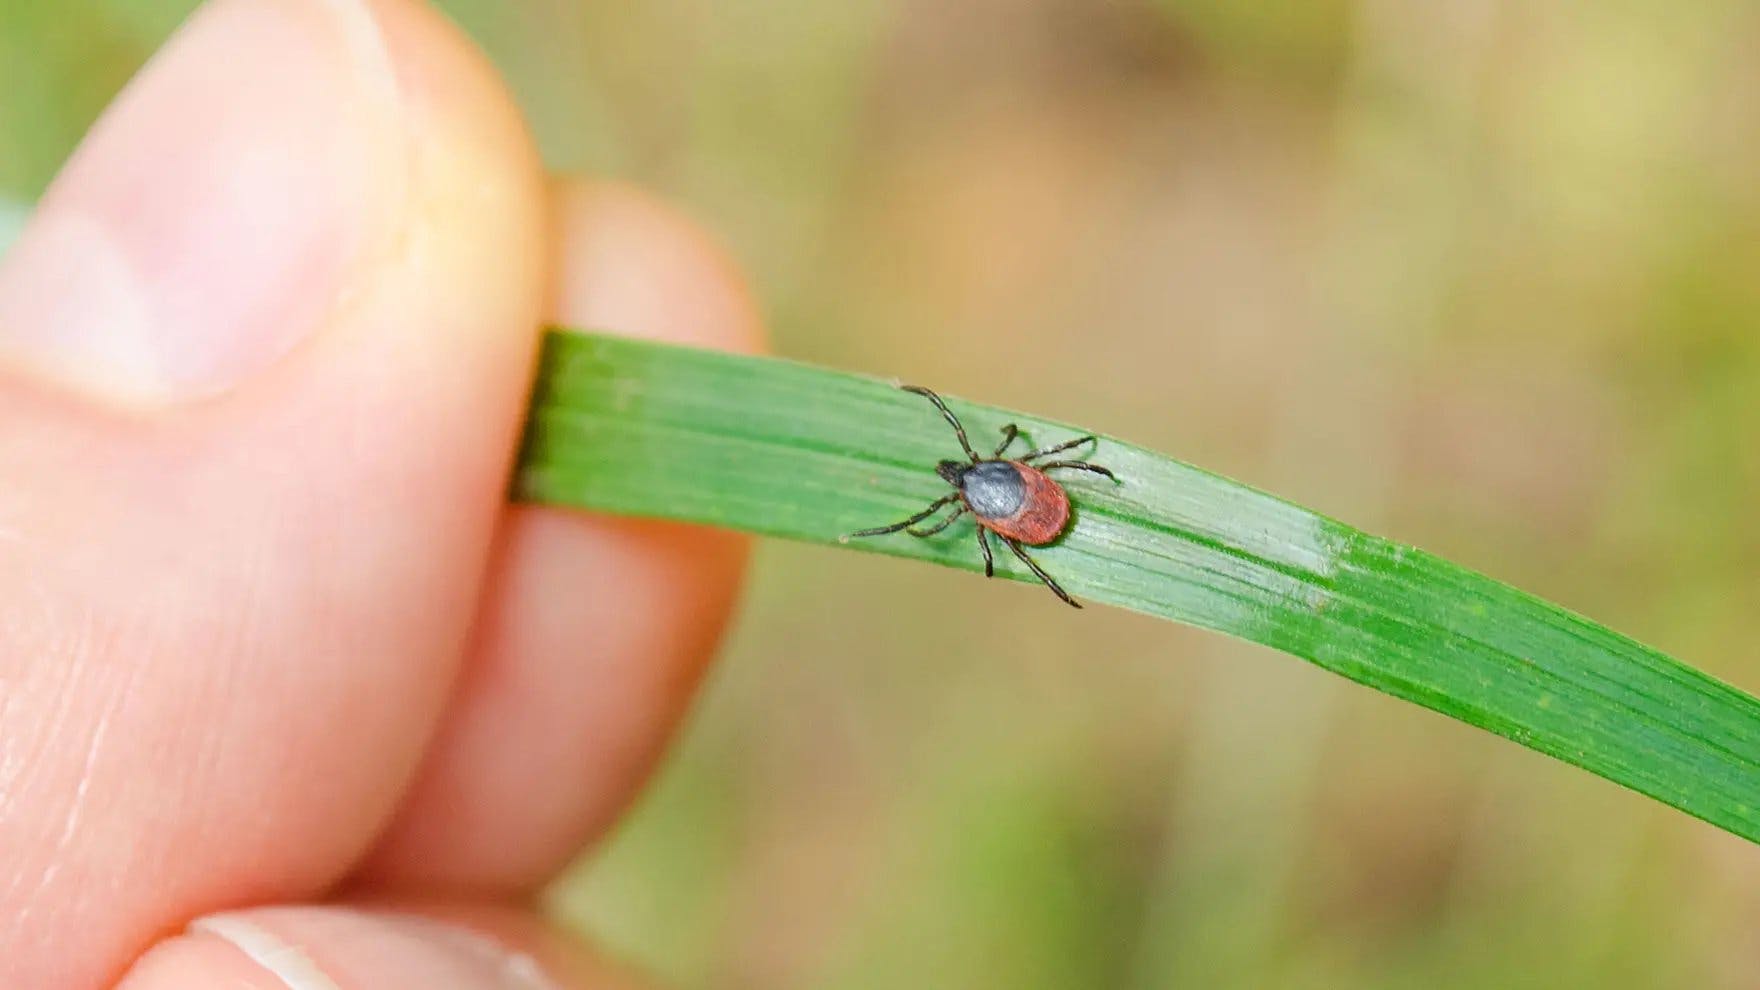 Person holds a blade of grass with a tick on it test